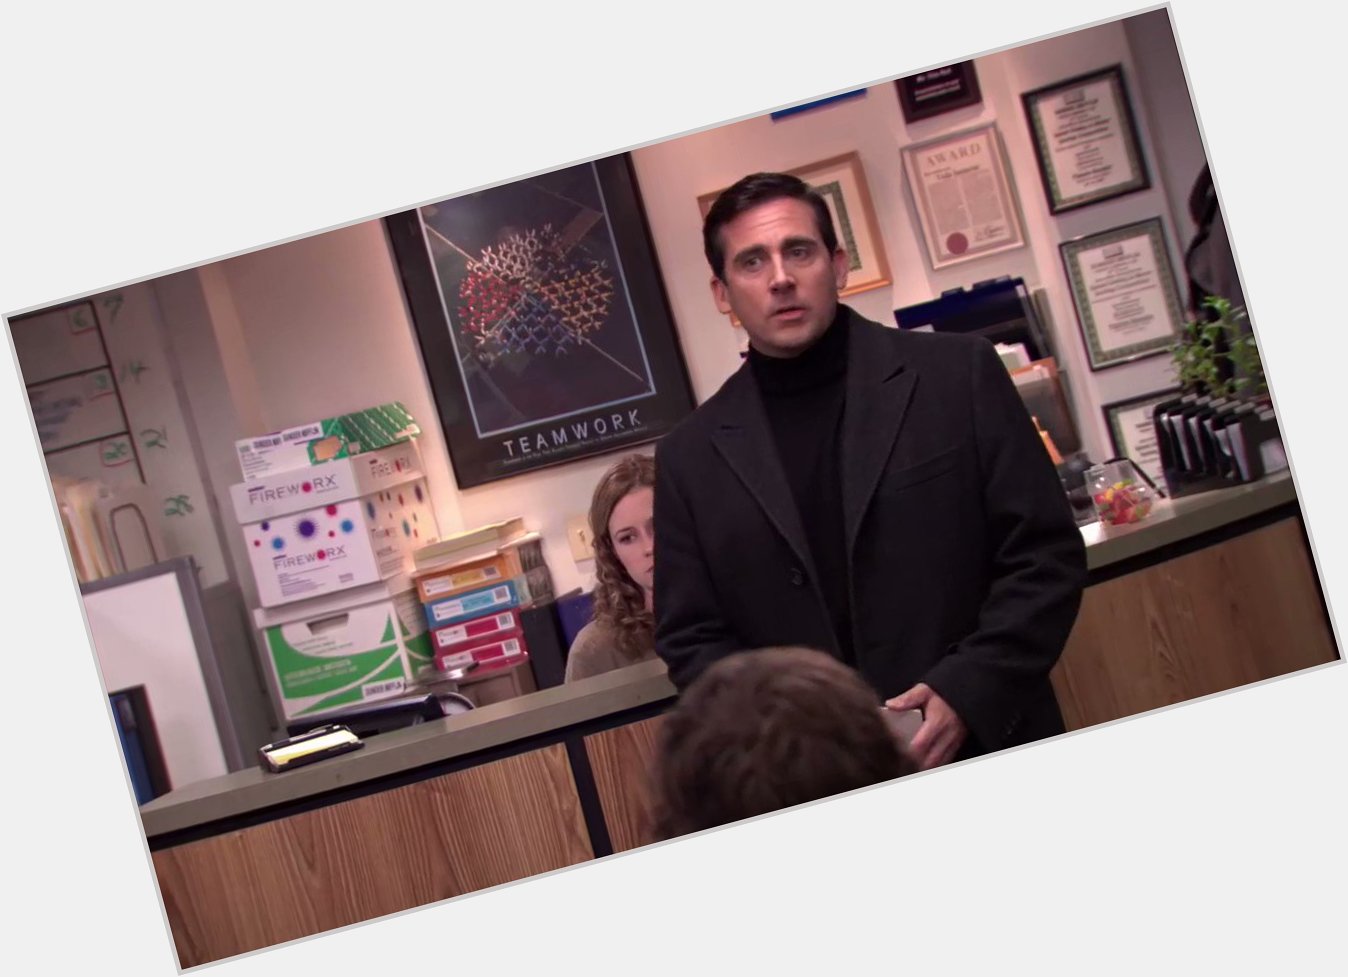 Happy 56th birthday Steve Carell. Steve being Michael Scott and roasting the whole office will forever be funny. 